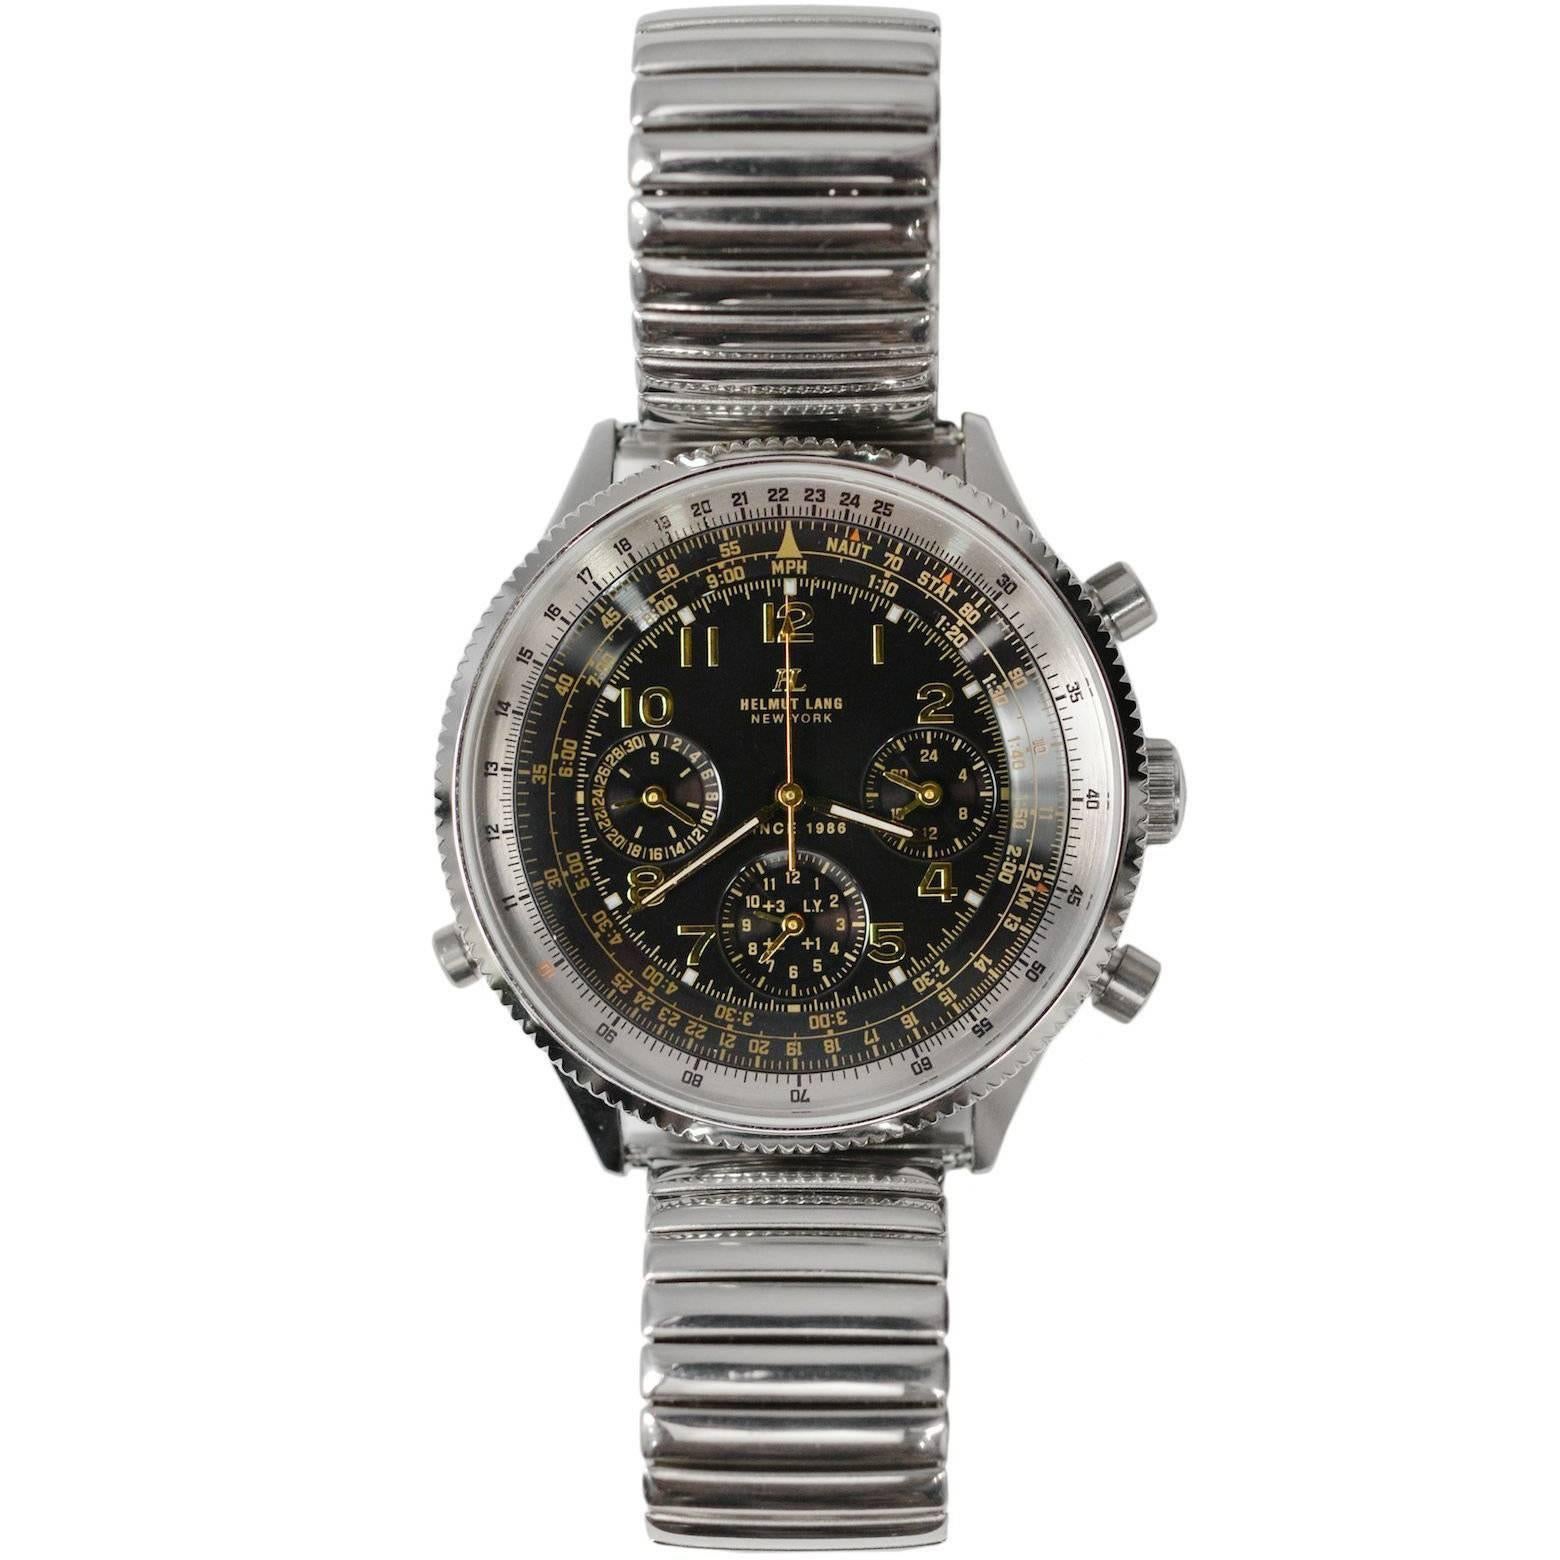 Helmut Lang Chronograph Watch 2004 Never Produced Sample 